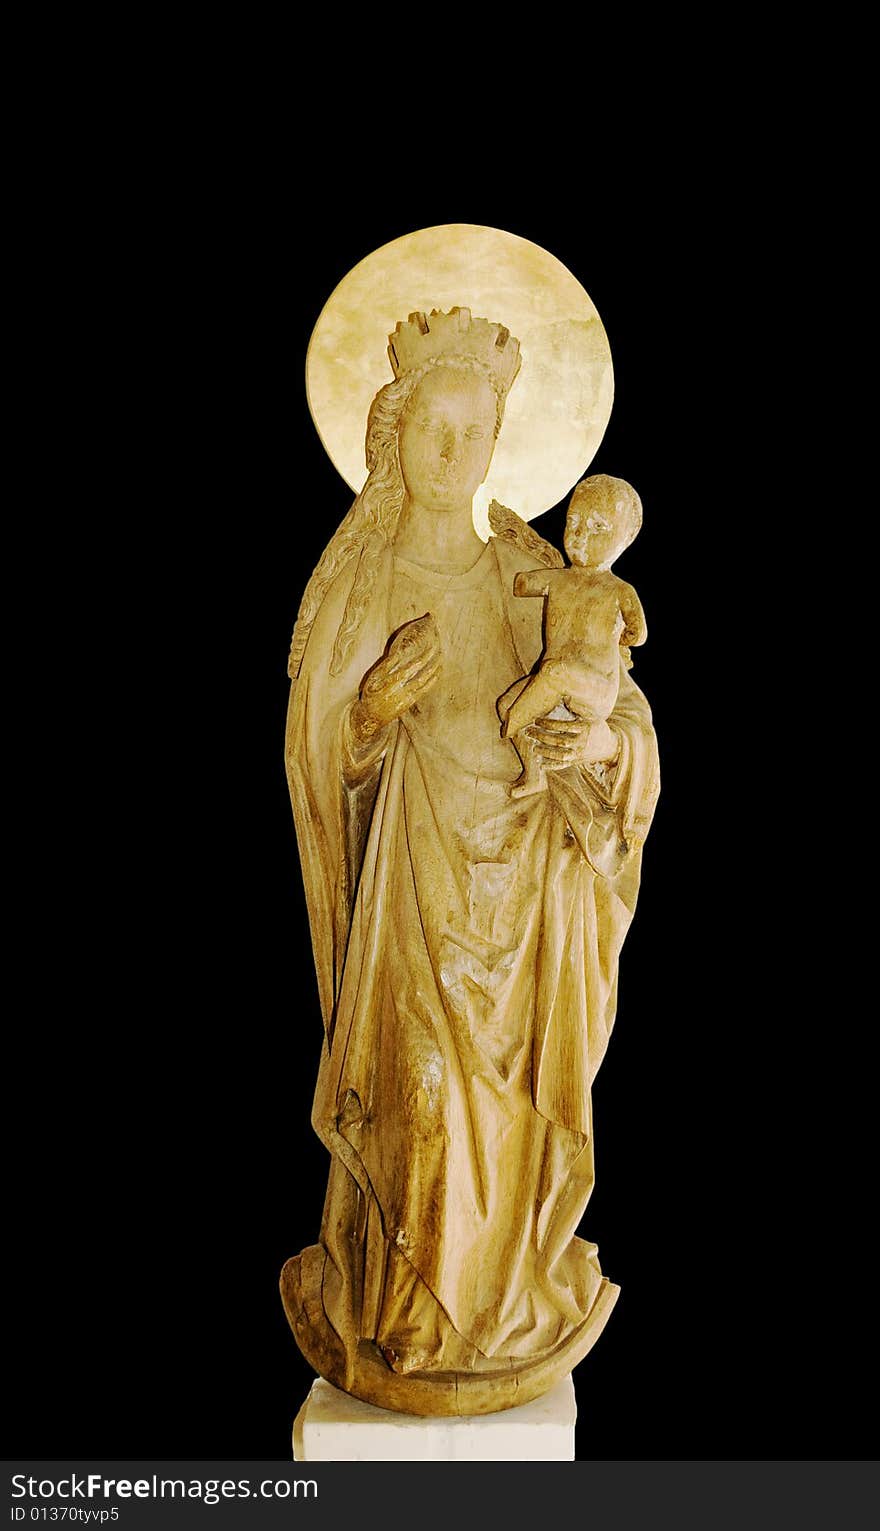 A wooden figure of Maria with the Jesus child in her arms. A wooden figure of Maria with the Jesus child in her arms